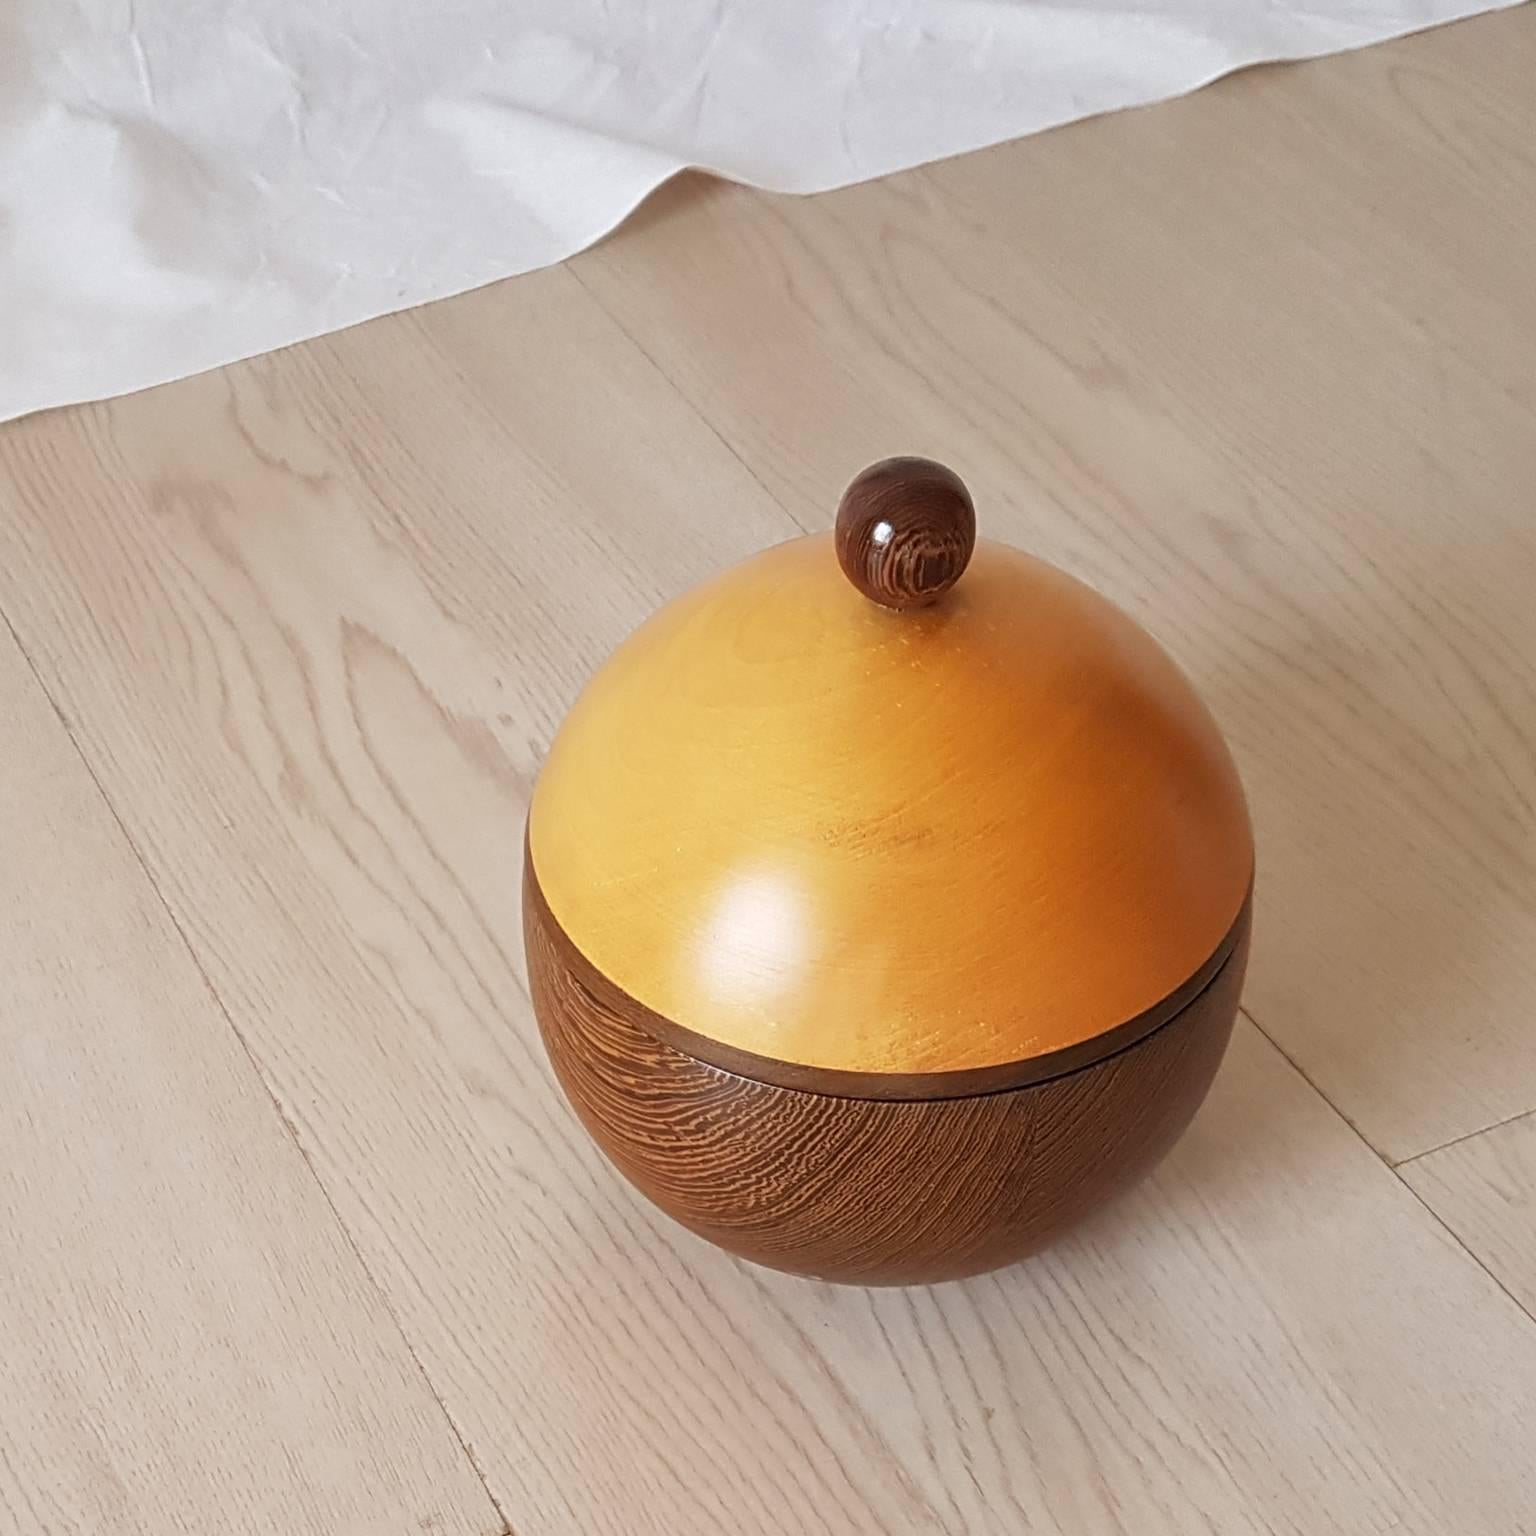 Spherical box from Finland manufacturer in maple and wengè wood.
It is a part of a collection.
The collection is composed by others boxes that have different geometric shapes (pyramidal, cylindrical,...) but same finishes.
 

 